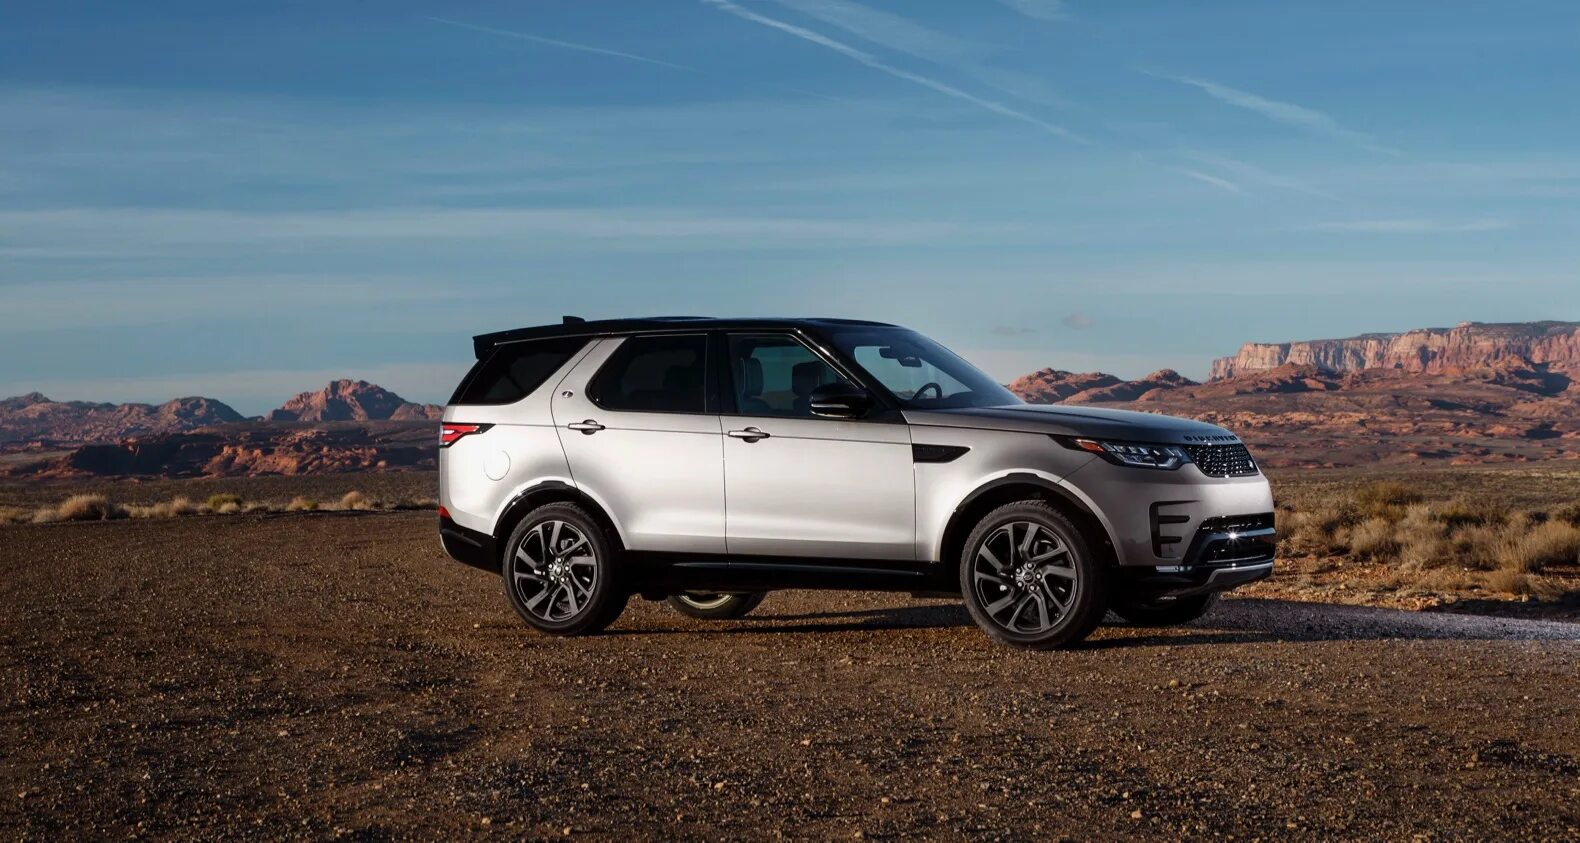 Range Rover Discovery 2023. Land Rover Discovery 2019. Рендж Ровер Дискавери 2019. Лендровер Дискавери 2023 SV.